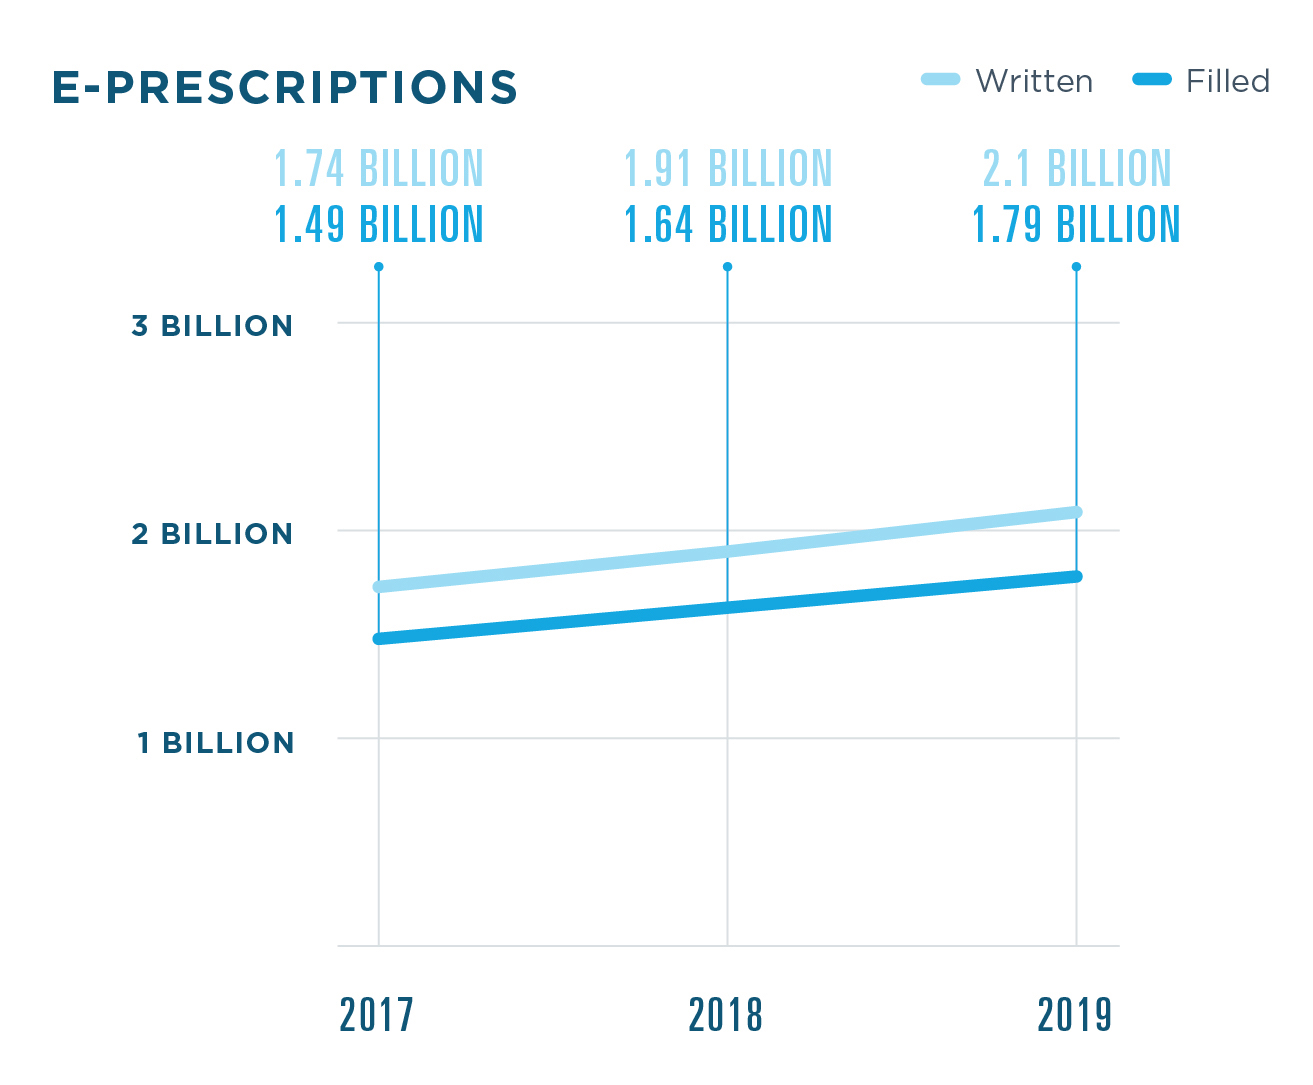 1.79 billion e-prescriptions were filled in 2019, compared to 1.64 billion in 2018 and 1.49 billion in 2017. 2.1 billion e-prescriptions were written in 2019, compared to 1.91 billion in 2018 and 1.74 billion in 2017. There were 134.2 million e-prescriptions for controlled substances filled in 2019, compared to 96.8 million in 2018 and 65 million in 2017. 159.77 million e-prescriptions for controlled substances were written in 2019, compared to 115.16 million in 2018 and 77.33 million in 2017.